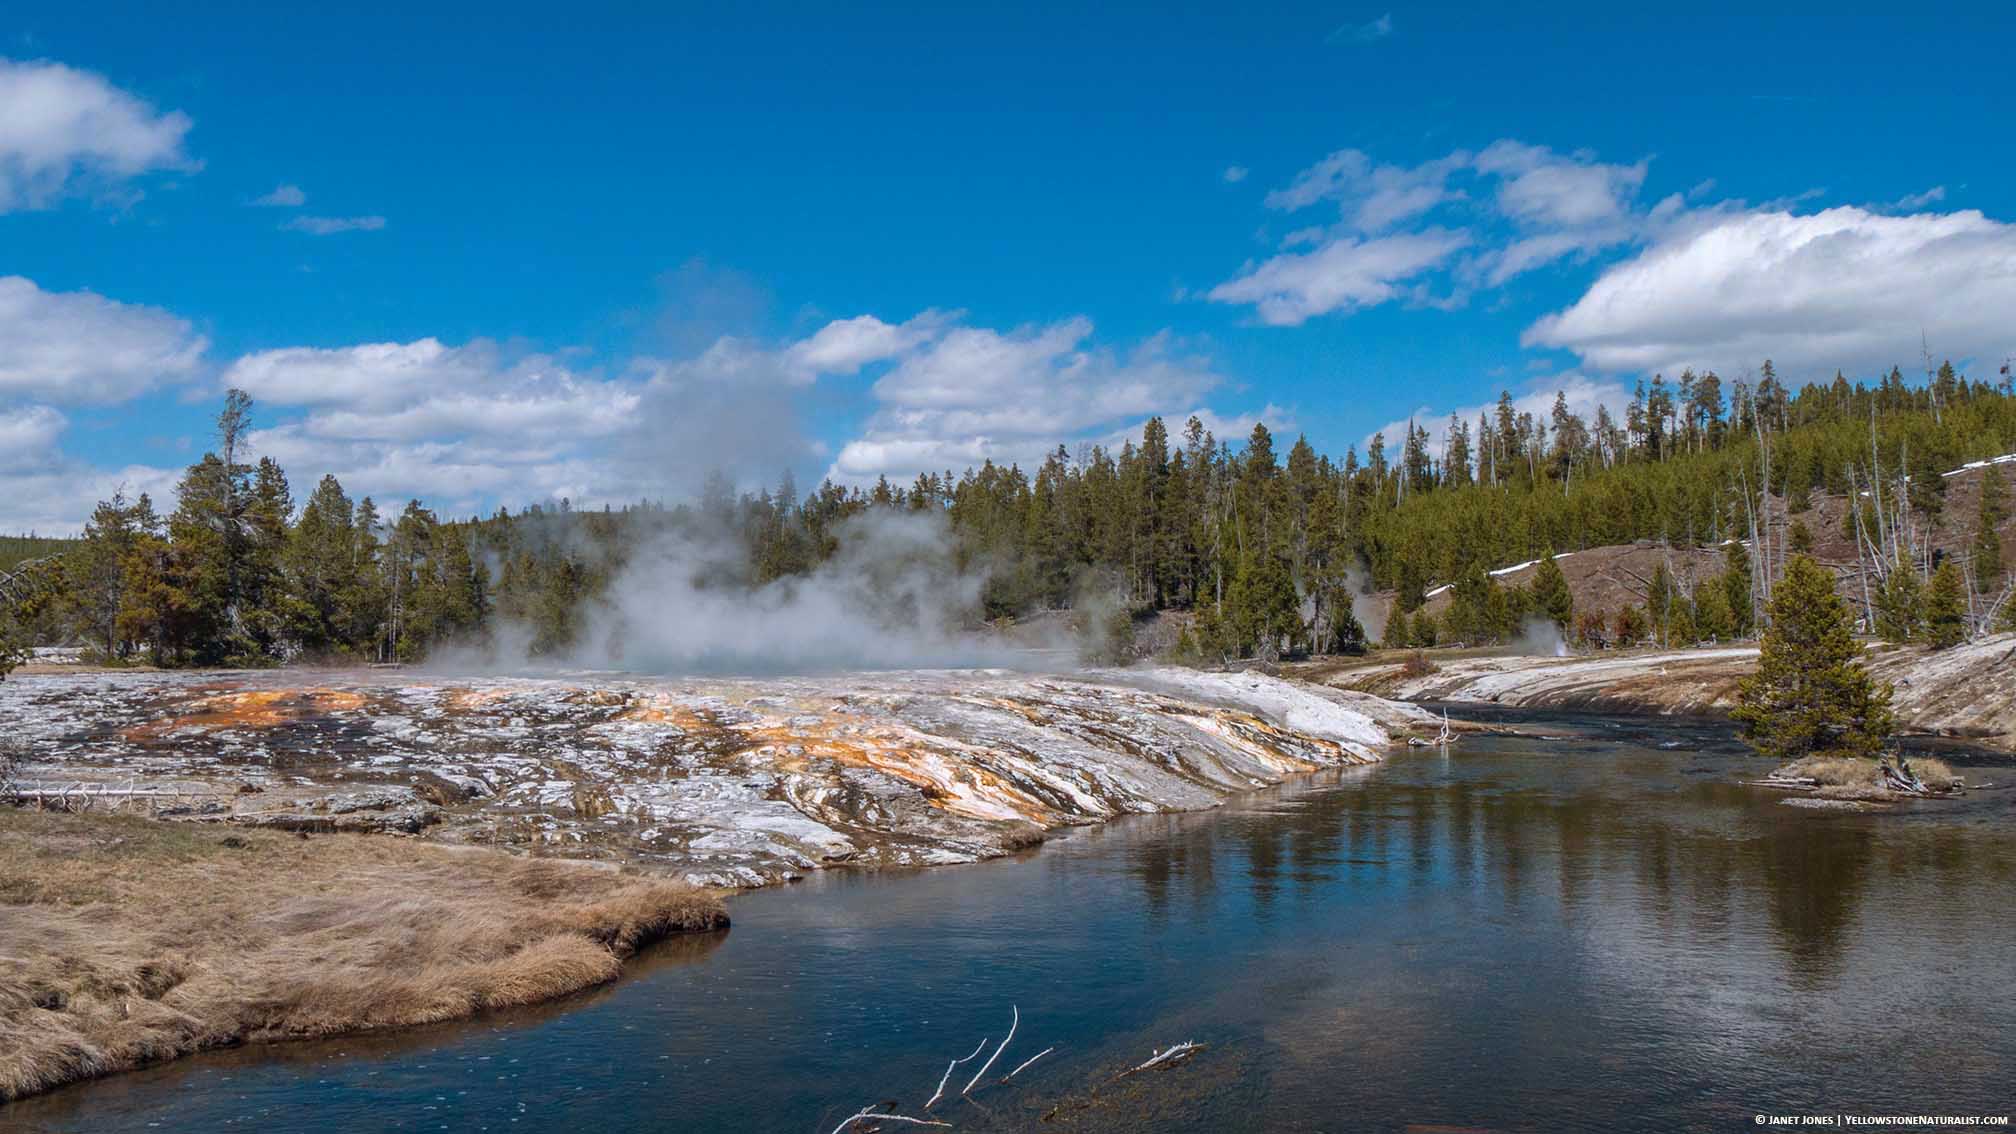 Oblong Geyser along the Firehole River in Yellowstone